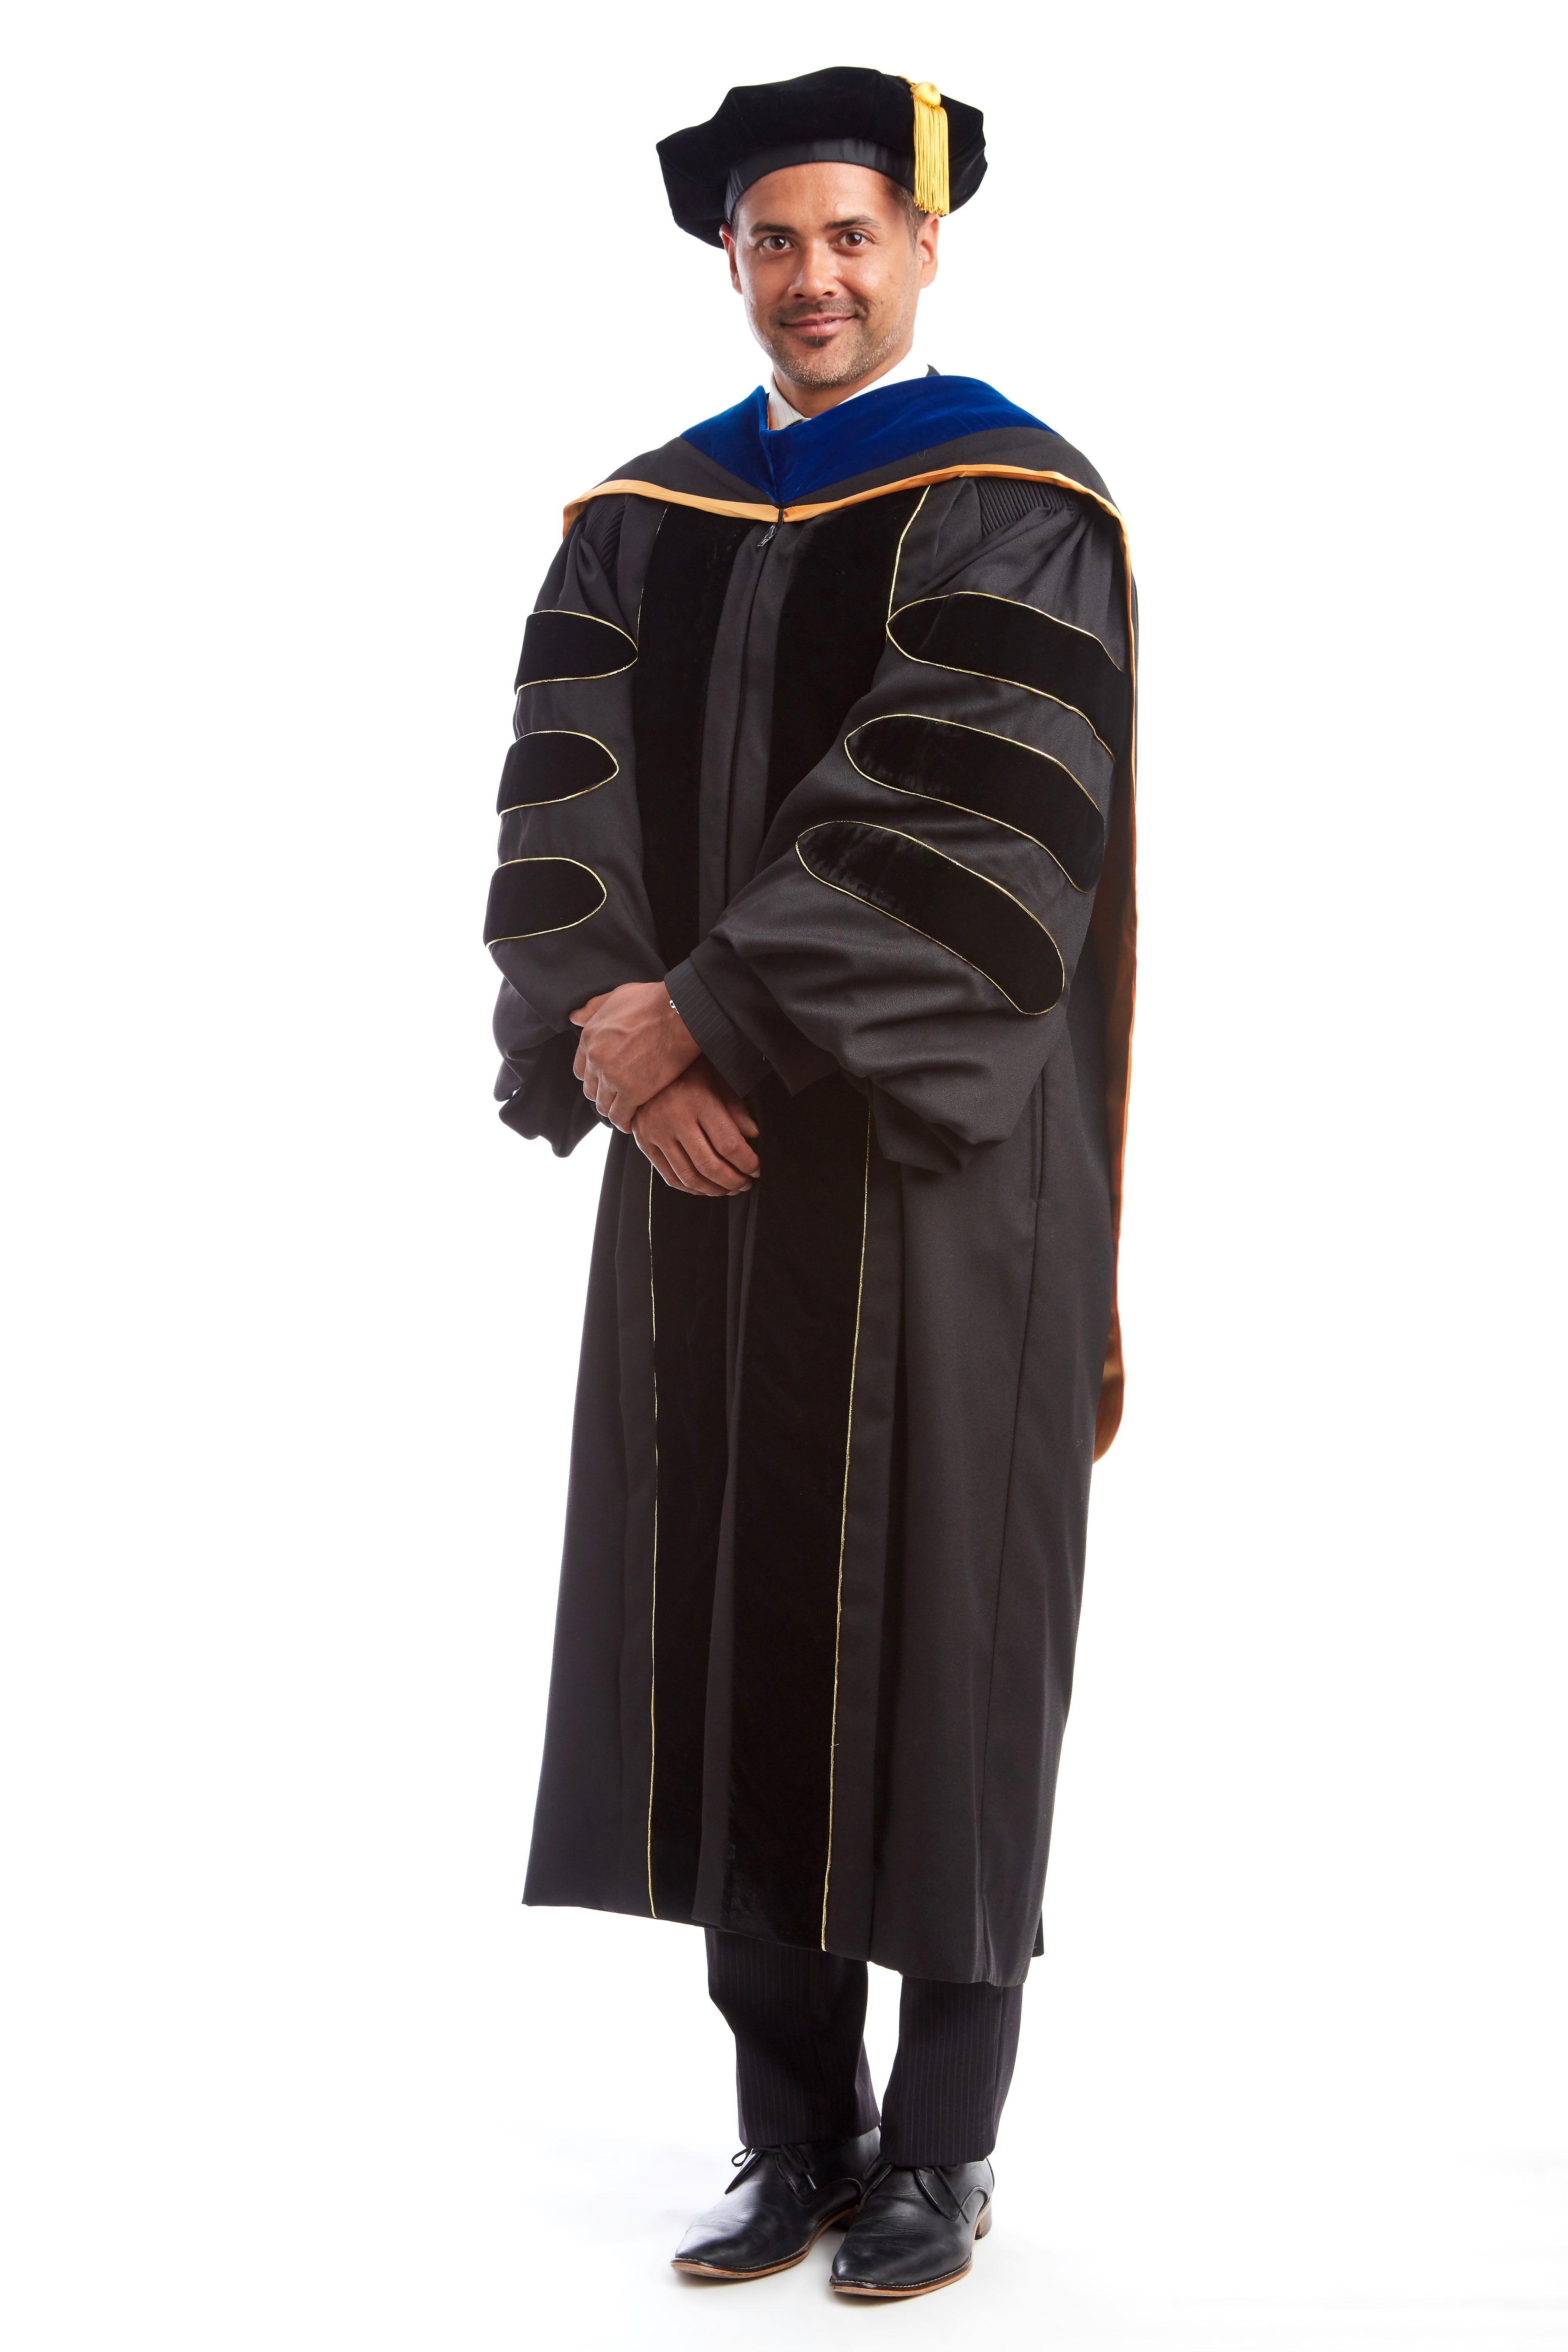 Amazon.com: TngHui Deluxe Doctoral Graduation Gown Doctoral Hood and Tam 8  Sided Package Sky Blue Size 42(4'9